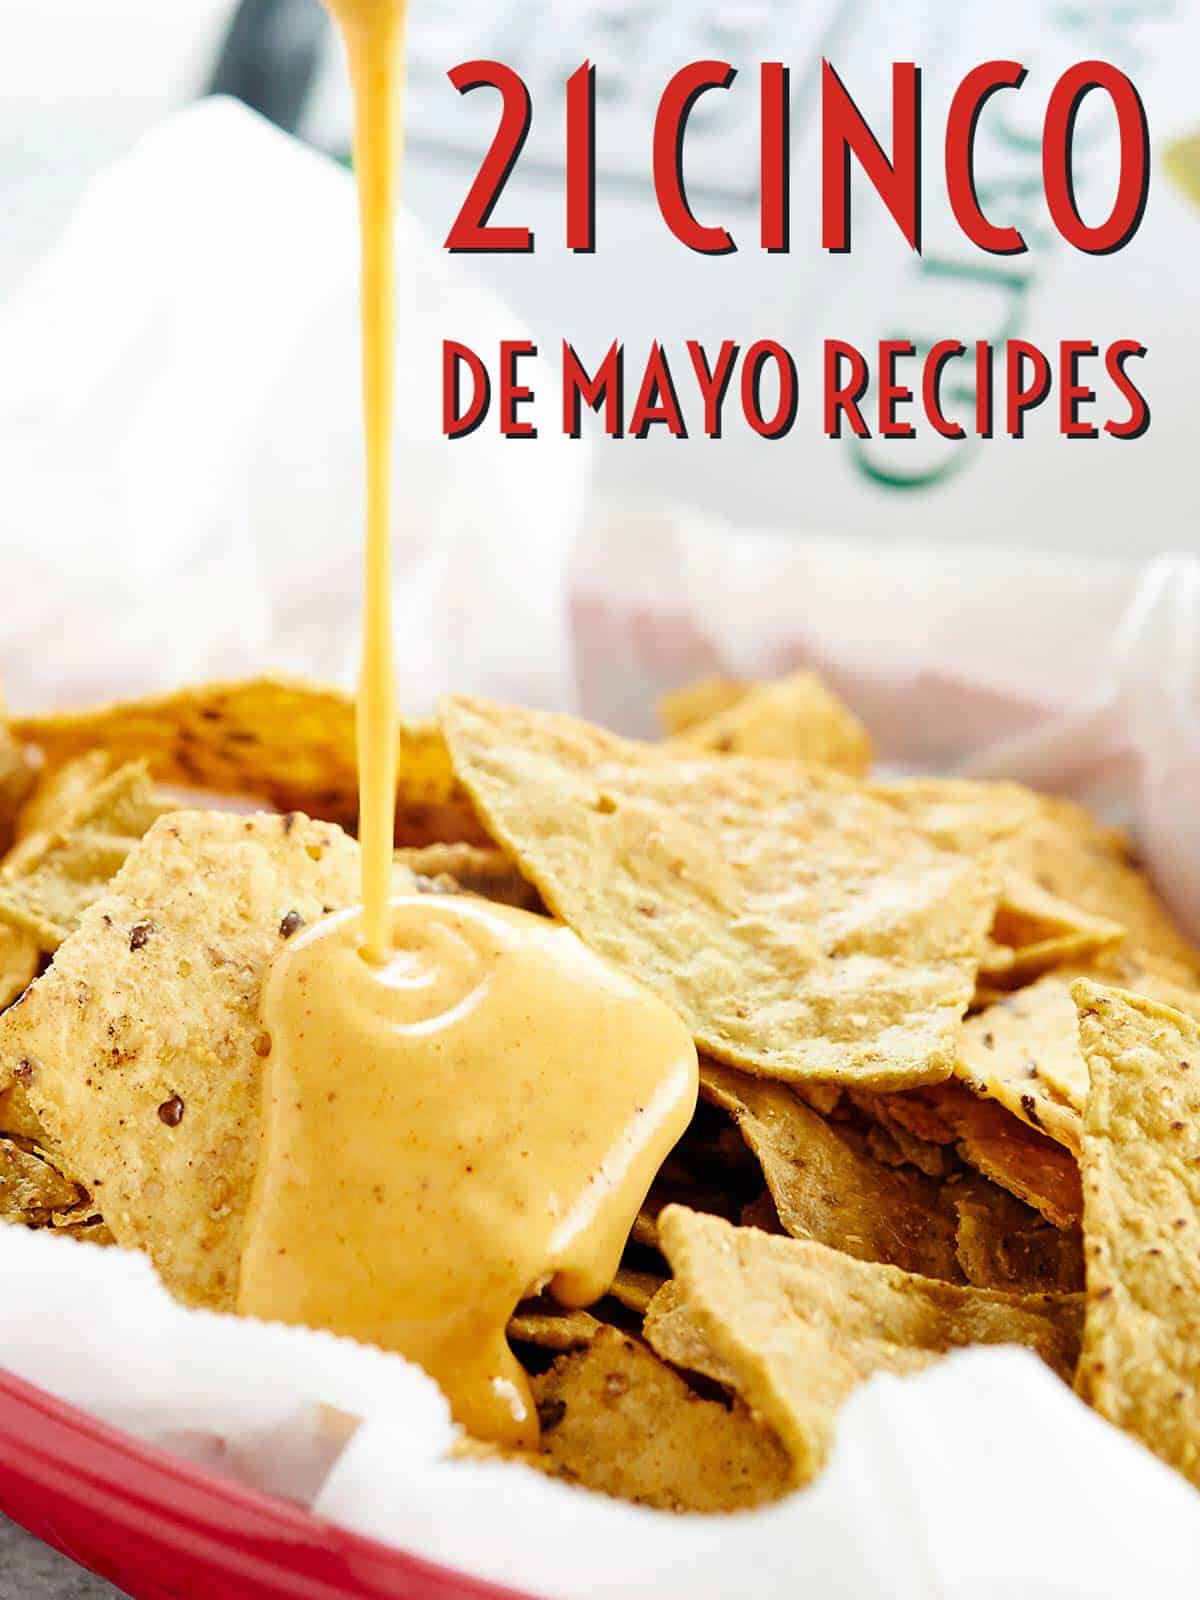 Let's celebrate my FAVORITE holiday with my favorite Cinco de Mayo Recipes! Everything from breakfast to chips and dip, main dishes, desserts, & margaritas. showmetheyummy.com #cincodemayo #mexicanfood